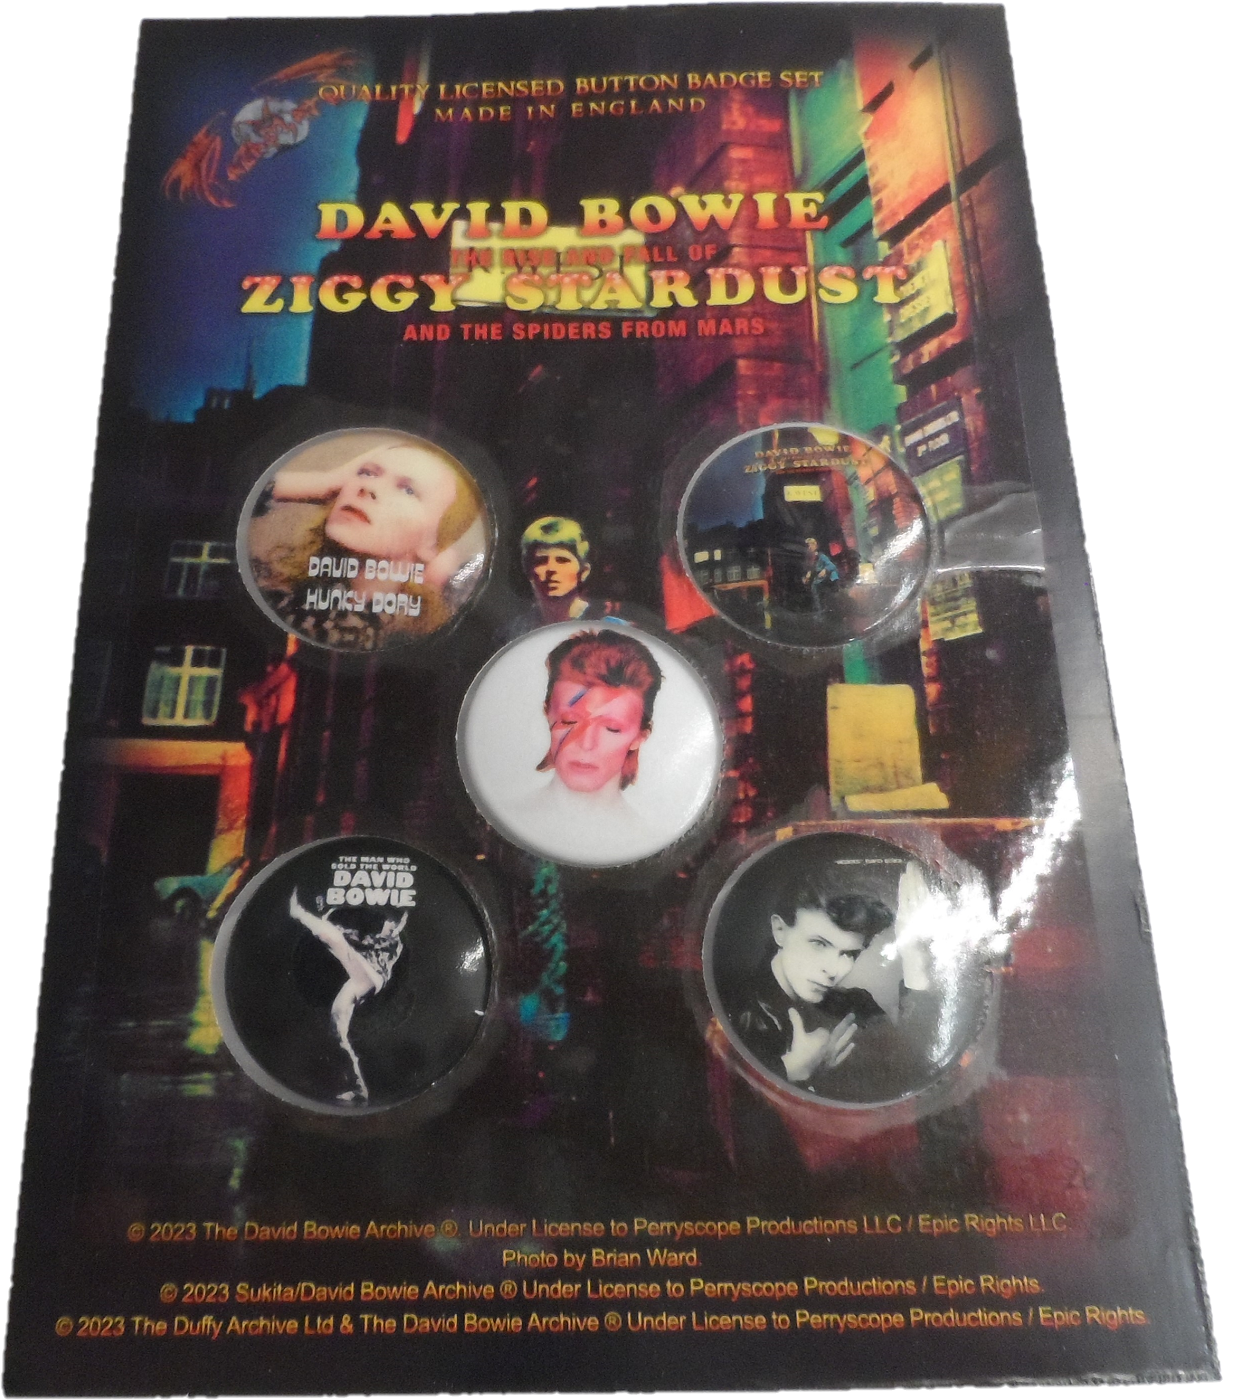 The David Bowie Early Albums Button Badge 5 Pack Set